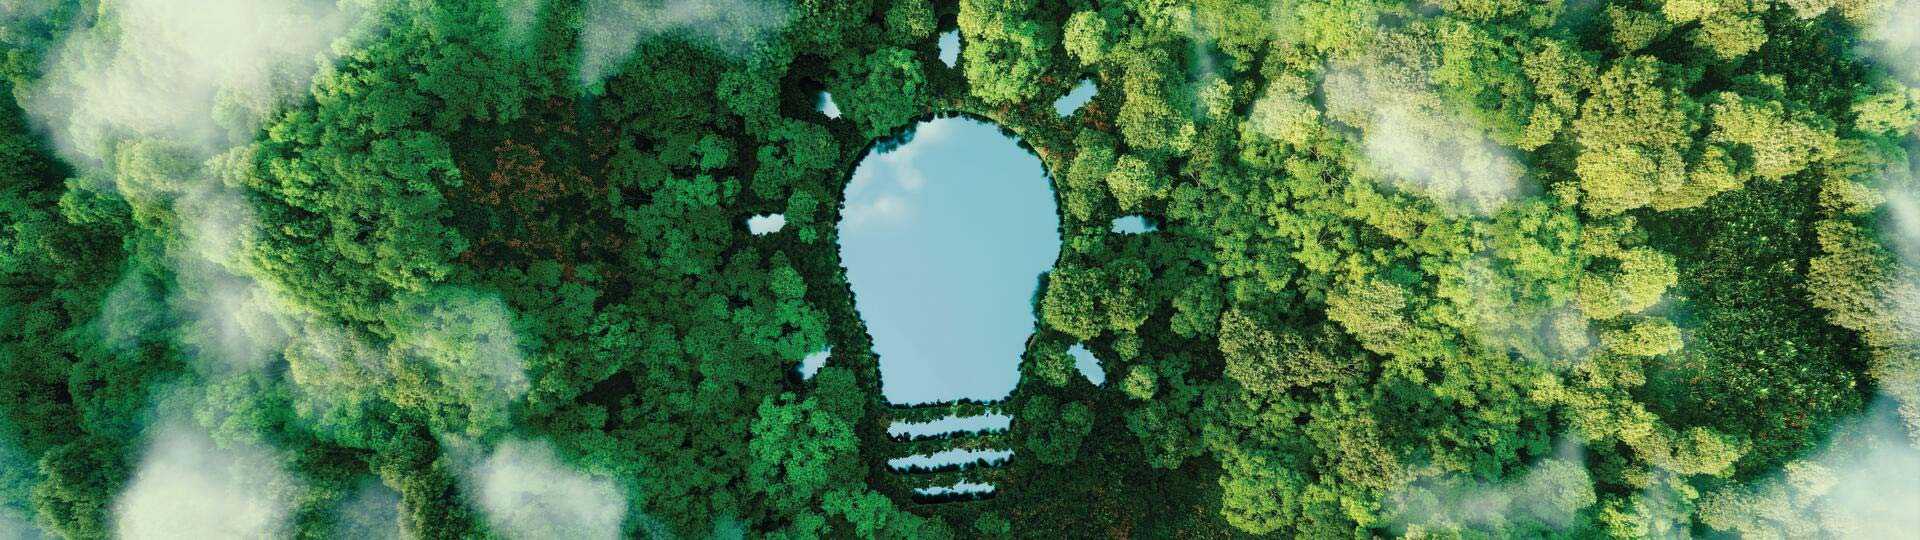 A bulb-shaped lake in the middle of a lush forest